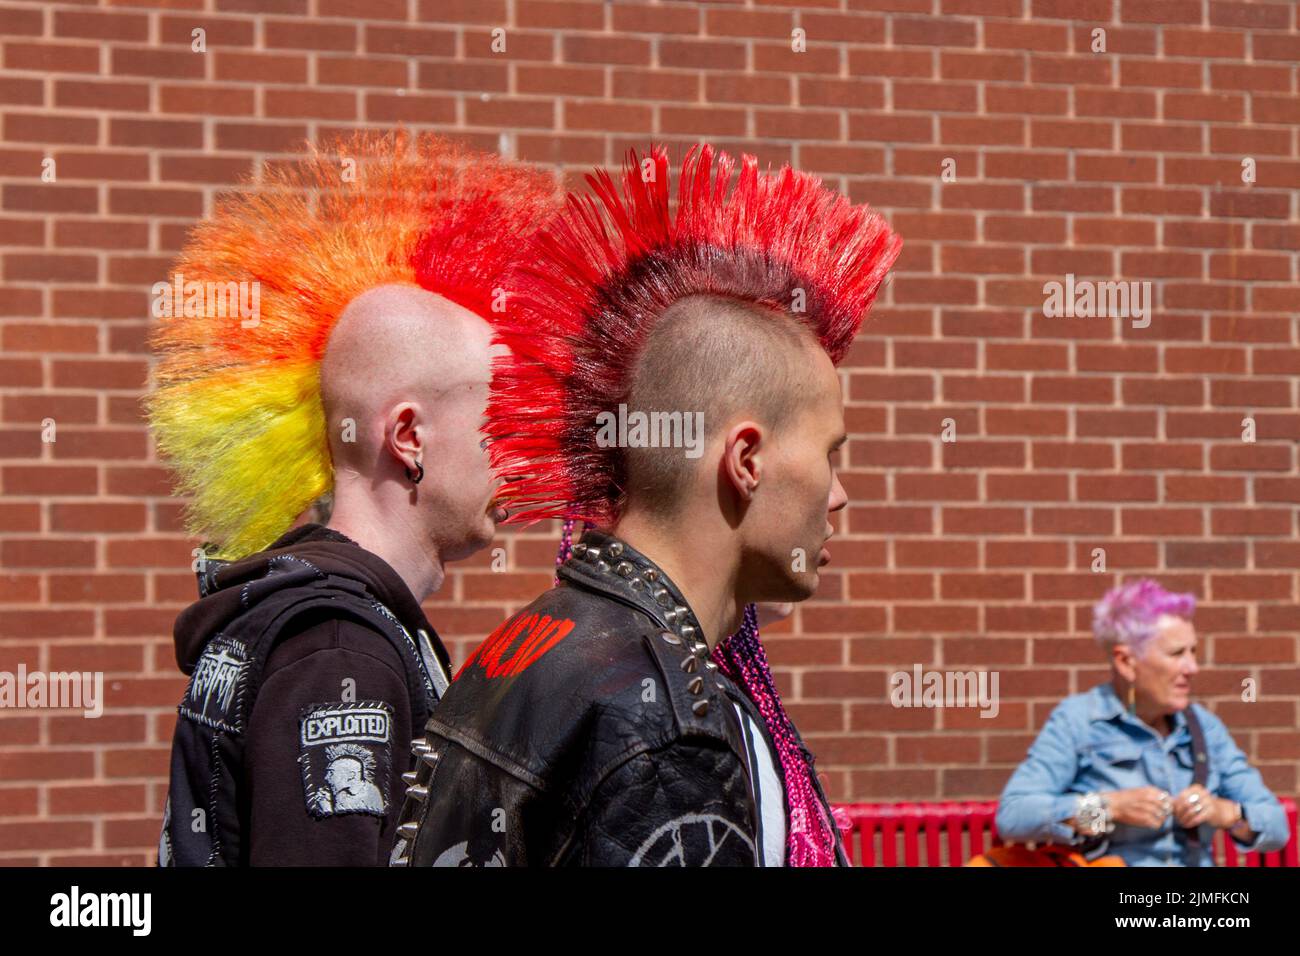 Dyed mohican liberty spikes hair in Blackpool, Lancashire, UK. Aug 2022. The punk subculture, ideologies, fashion, with Mohican dyed hairstyles and colouring at the Punk Rebellion festival at The Winter Gardens. A protest against conventional attitudes and behaviour, a clash of anti-establishment cultures,  mohawks, safety pins and a load of attitude at the seaside town as punks attending the annual Rebellion rock music festival at the Winter Gardens come shoulder to shoulder with traditional holidaymakers. Stock Photo